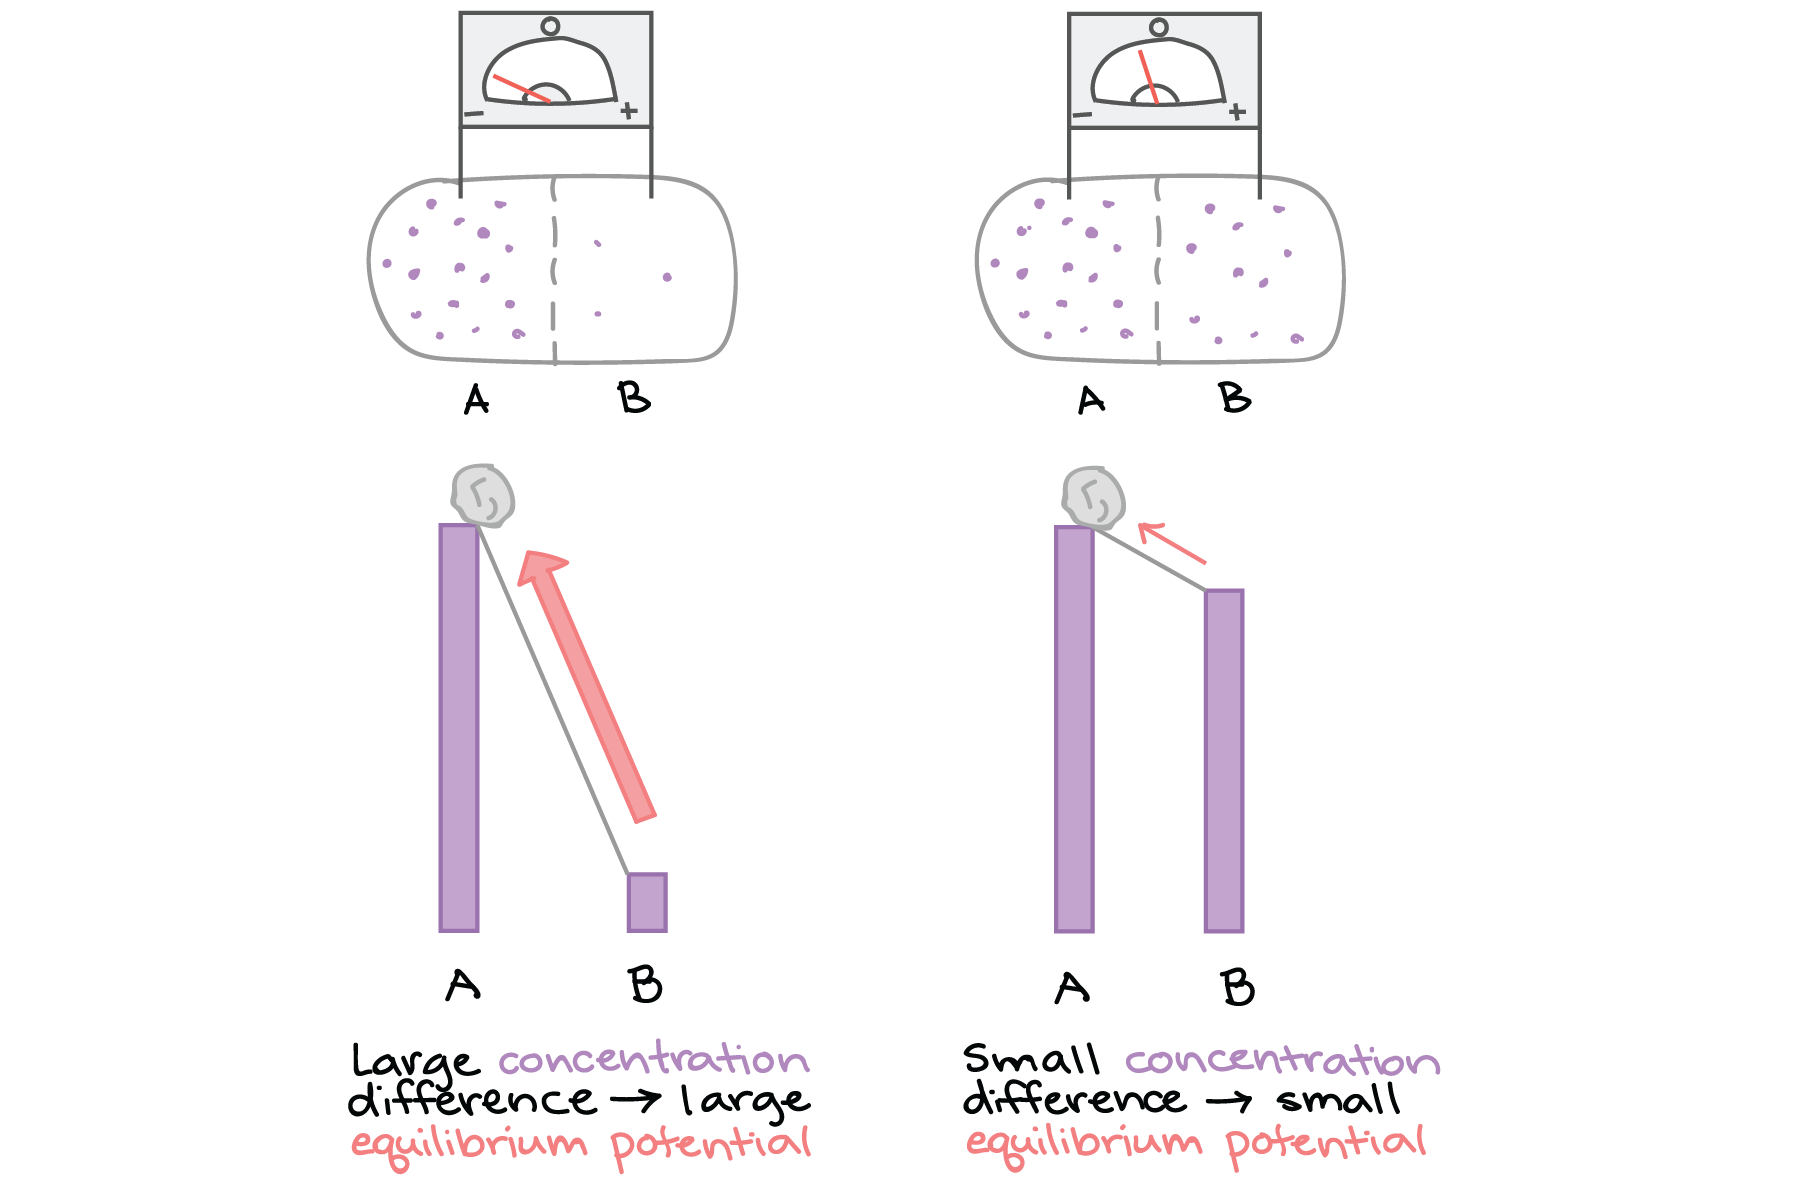 Left panel: Two compartments separated by a semi-permeable membrane, labeled A and B. There is a voltmeter between A and B. The ion of interest is much more concentrated in A than in B, and the voltmeter with electrodes in A and B registers a large negative voltage. The voltage is analogous to the force we would have to exert to keep a boulder from rolling from a very high place down a hill to a very low place. Right panel: Same setup, but with A and B having a much slighter difference in concentration of the ion of interest (B slightly less concentrated than A). In this case, the voltage is only slightly negative. This is analogous to the case where we have a very high place and a slightly lower place and are exerting a force to keep a boulder from rolling down this not-very-steep hill.